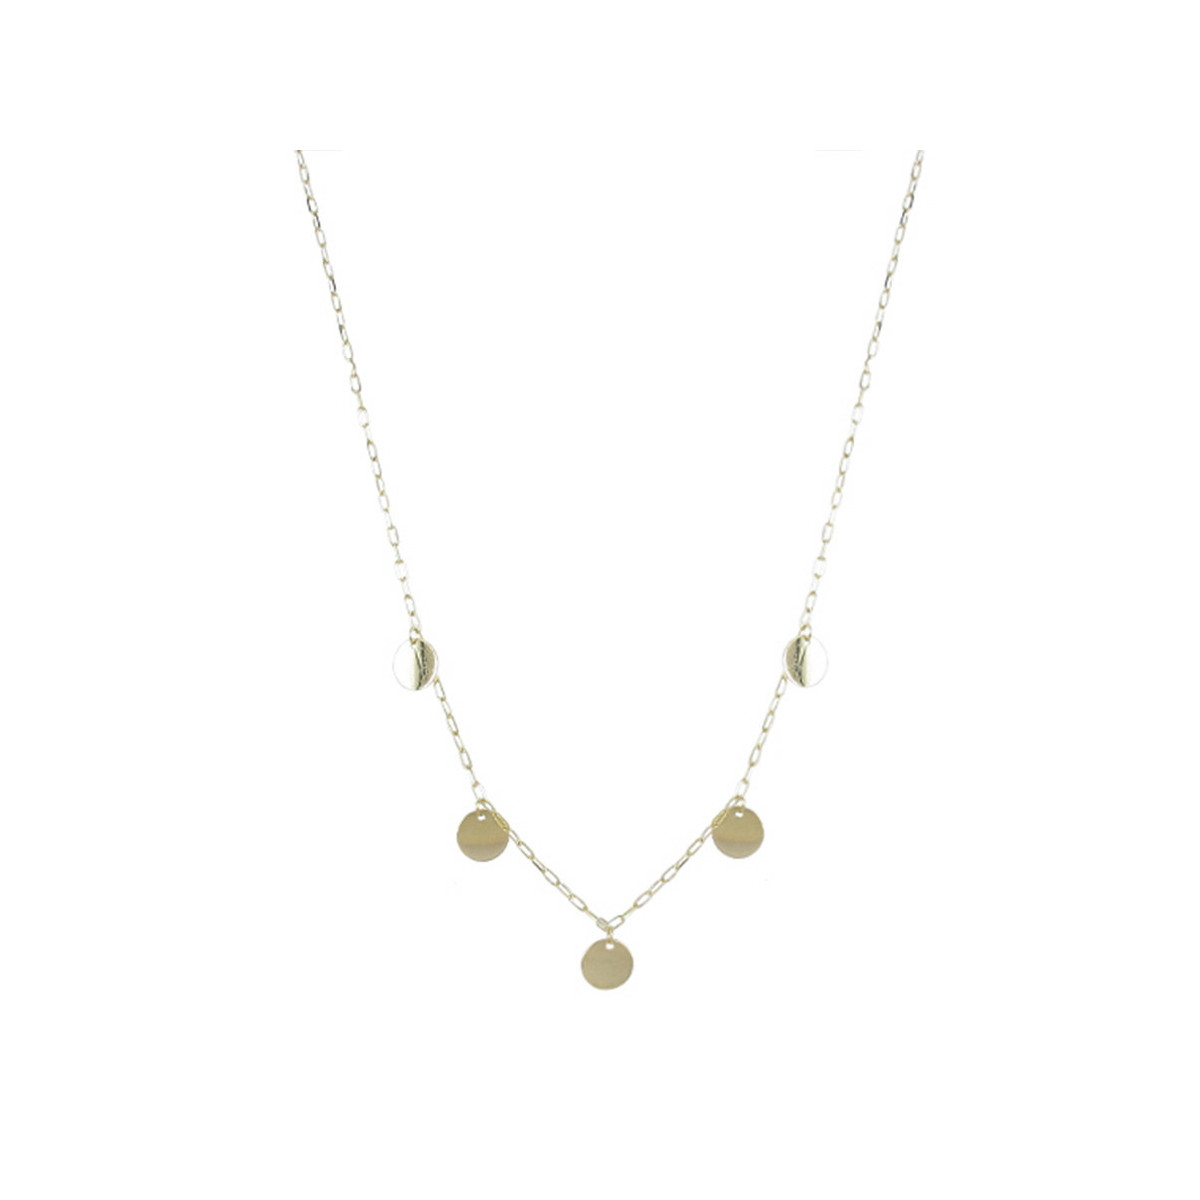 18K YELLOW GOLD NECKLACE